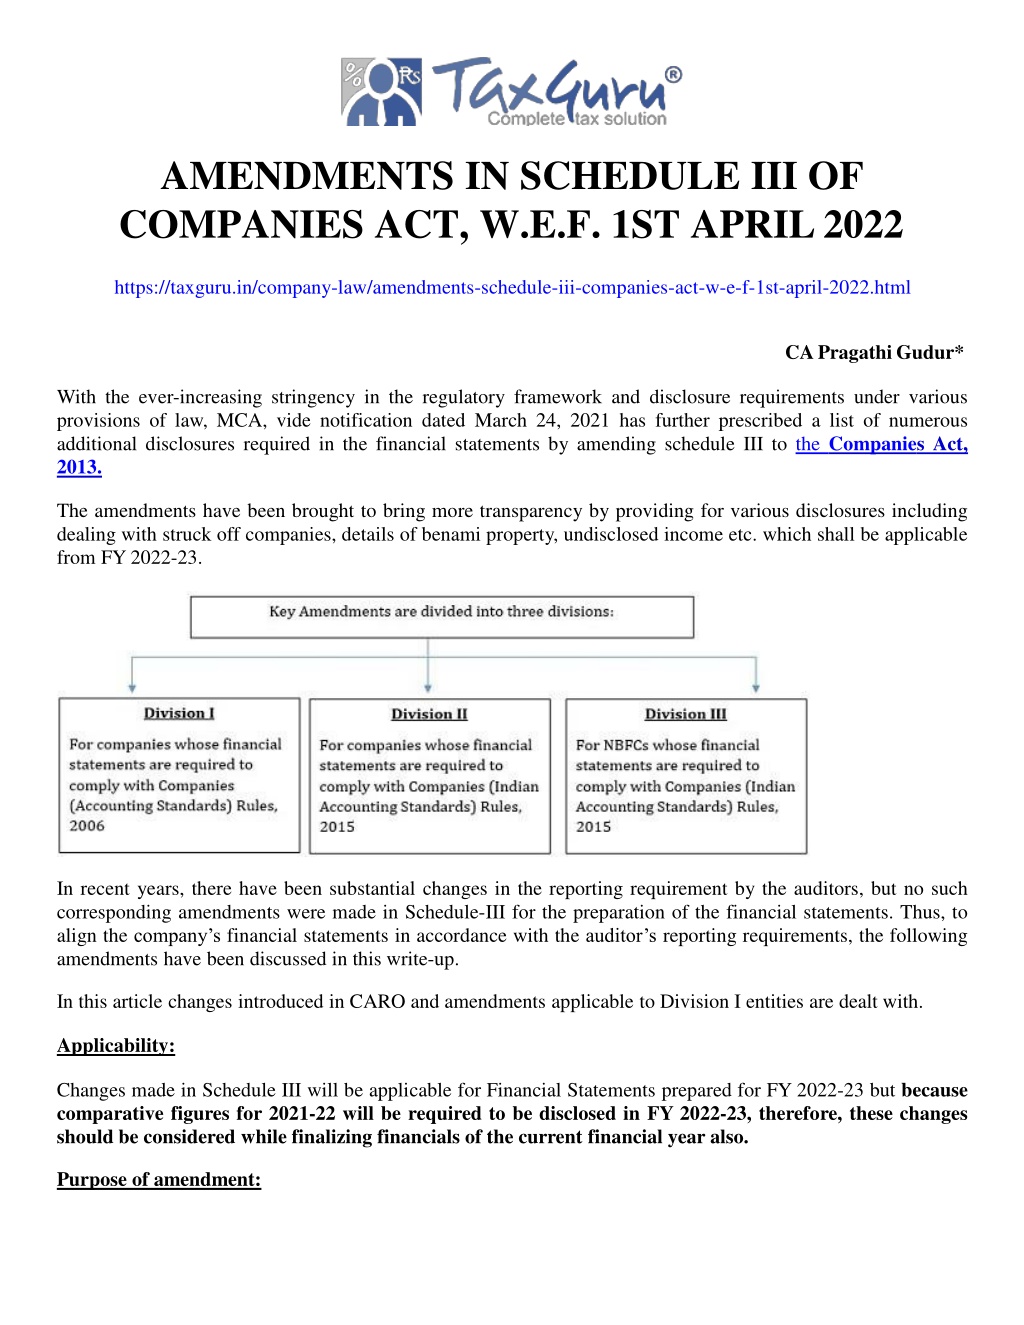 PPT Amendments in Schedule III of Companies Act, w.e.f. 1st April